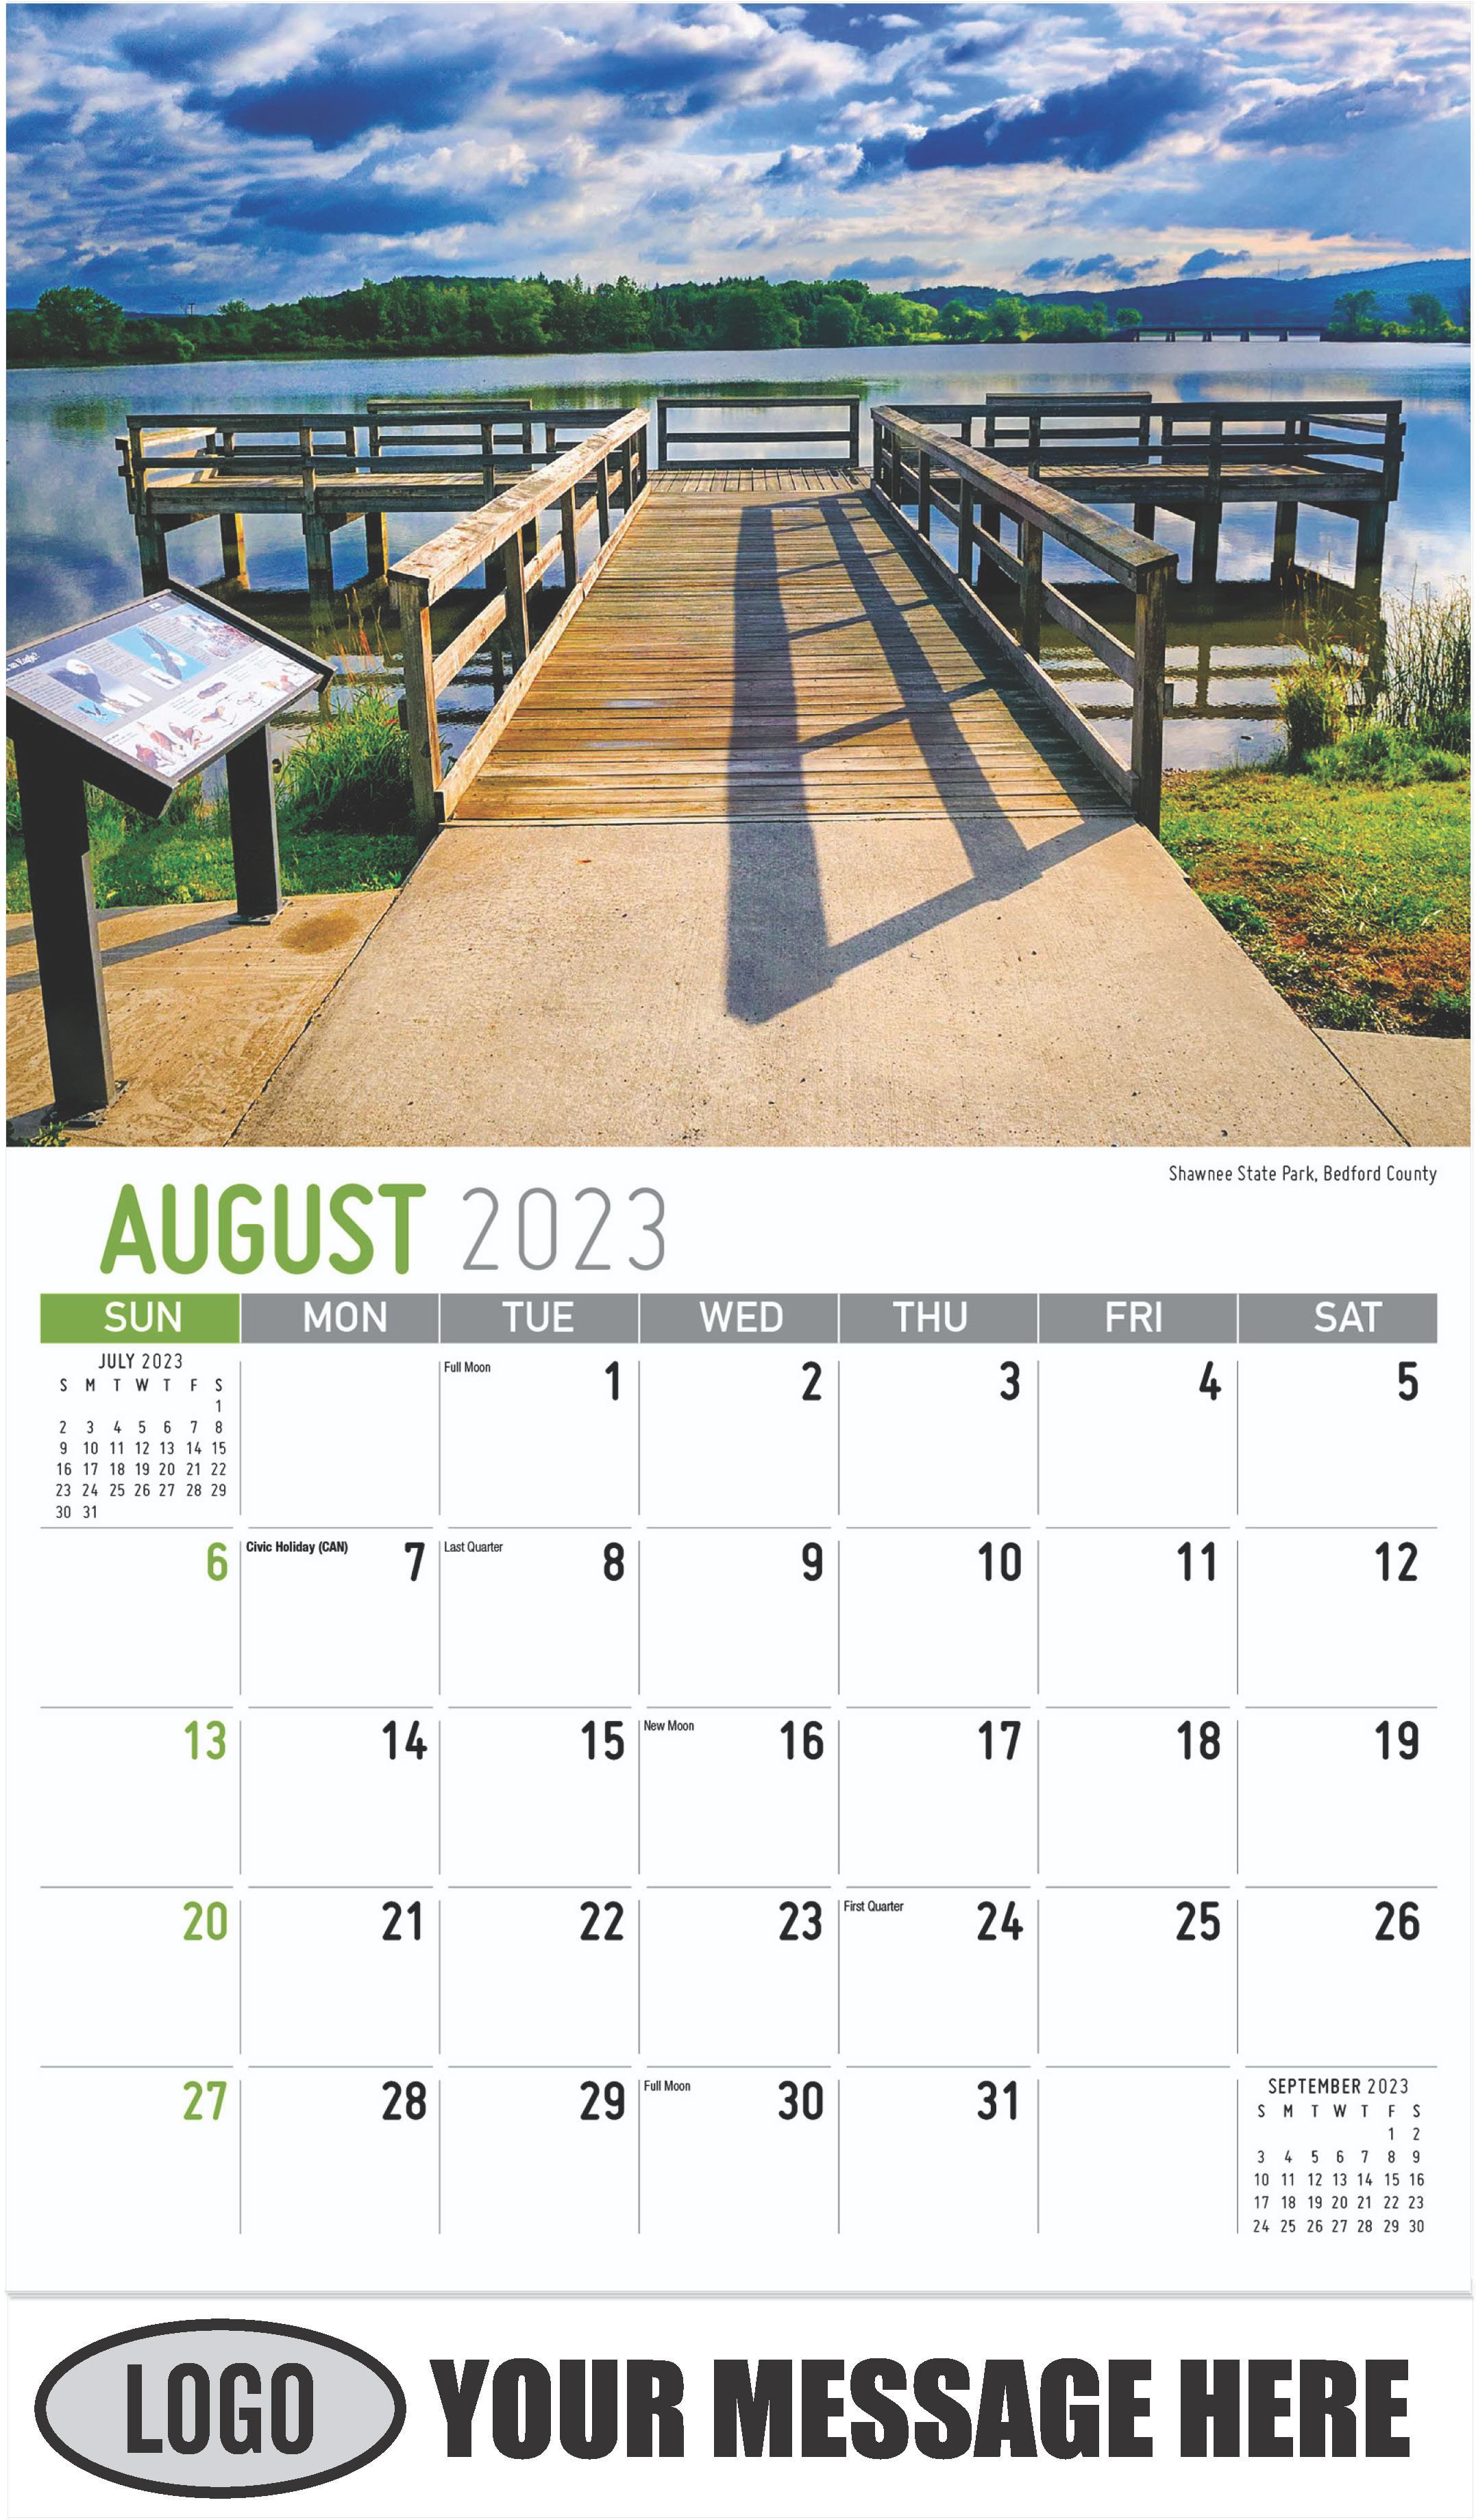 Shawnee State Park, Bedford County - August - Scenes of Pennsylvania 2023 Promotional Calendar